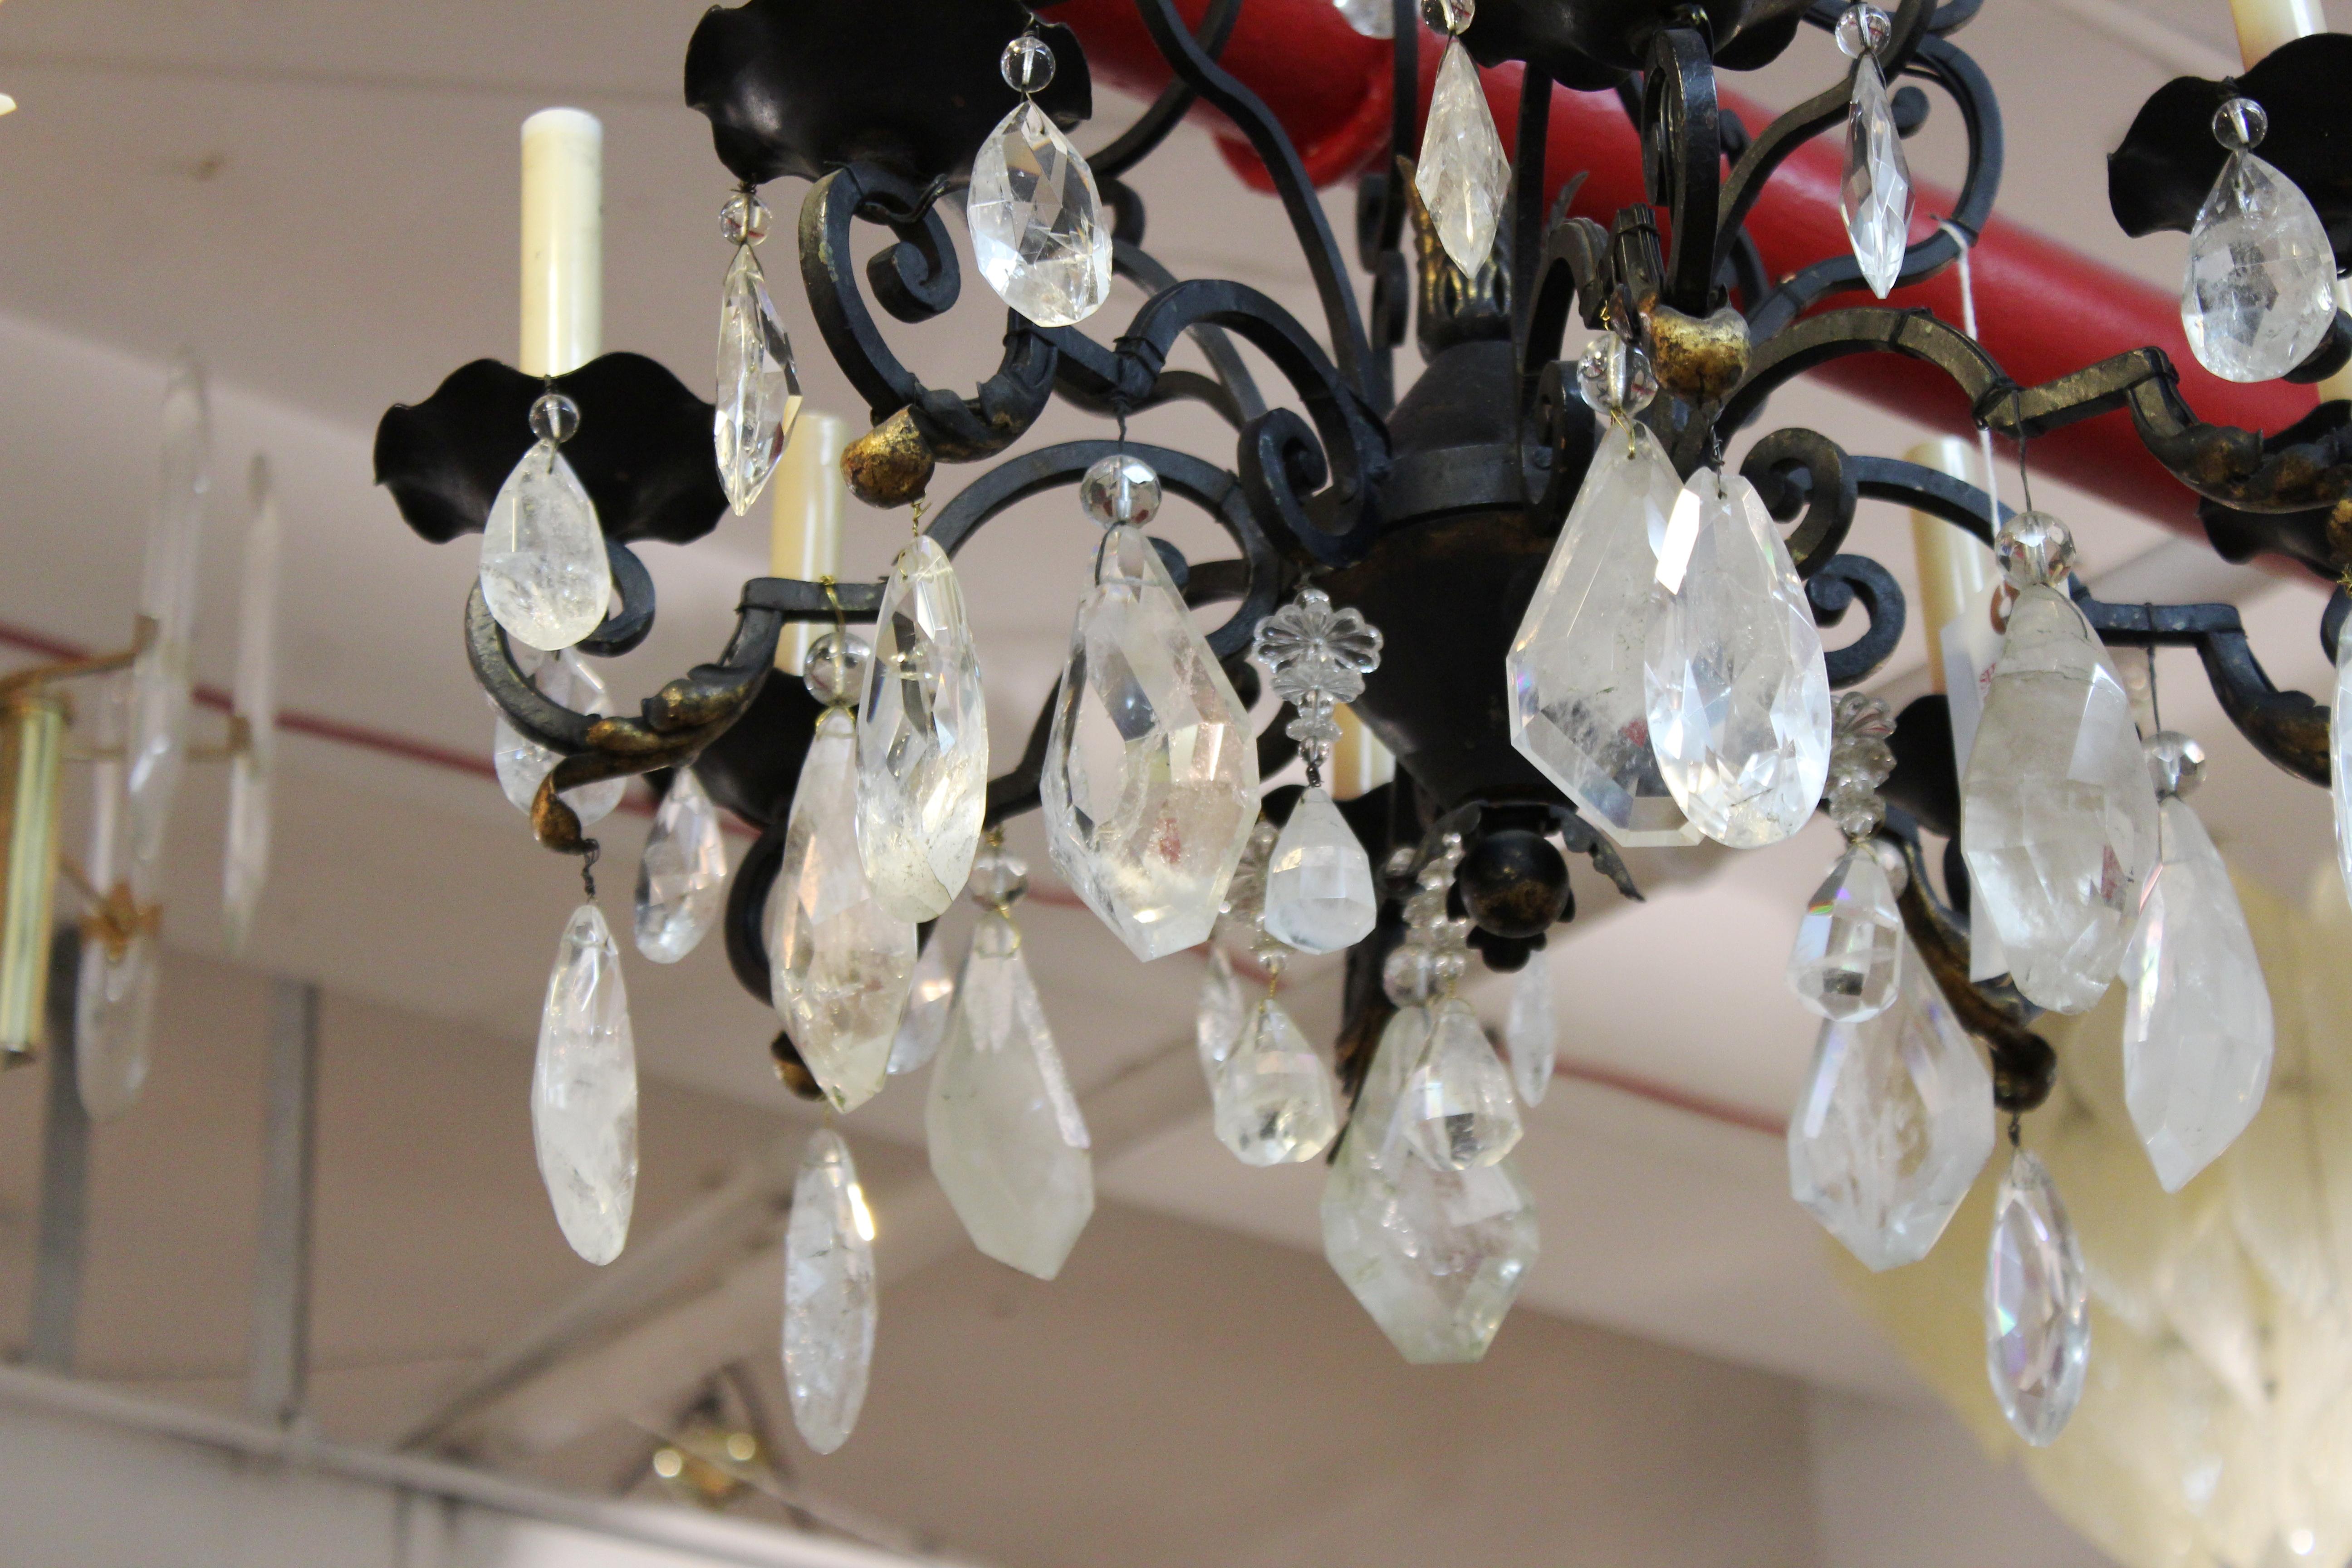 French neoclassical style bronze eight-light chandelier. The piece has hanging rock crystal quartz prisms and drops of various sizes and a decorative leaf motif on the frame. In great vintage condition with age-appropriate wear and use.